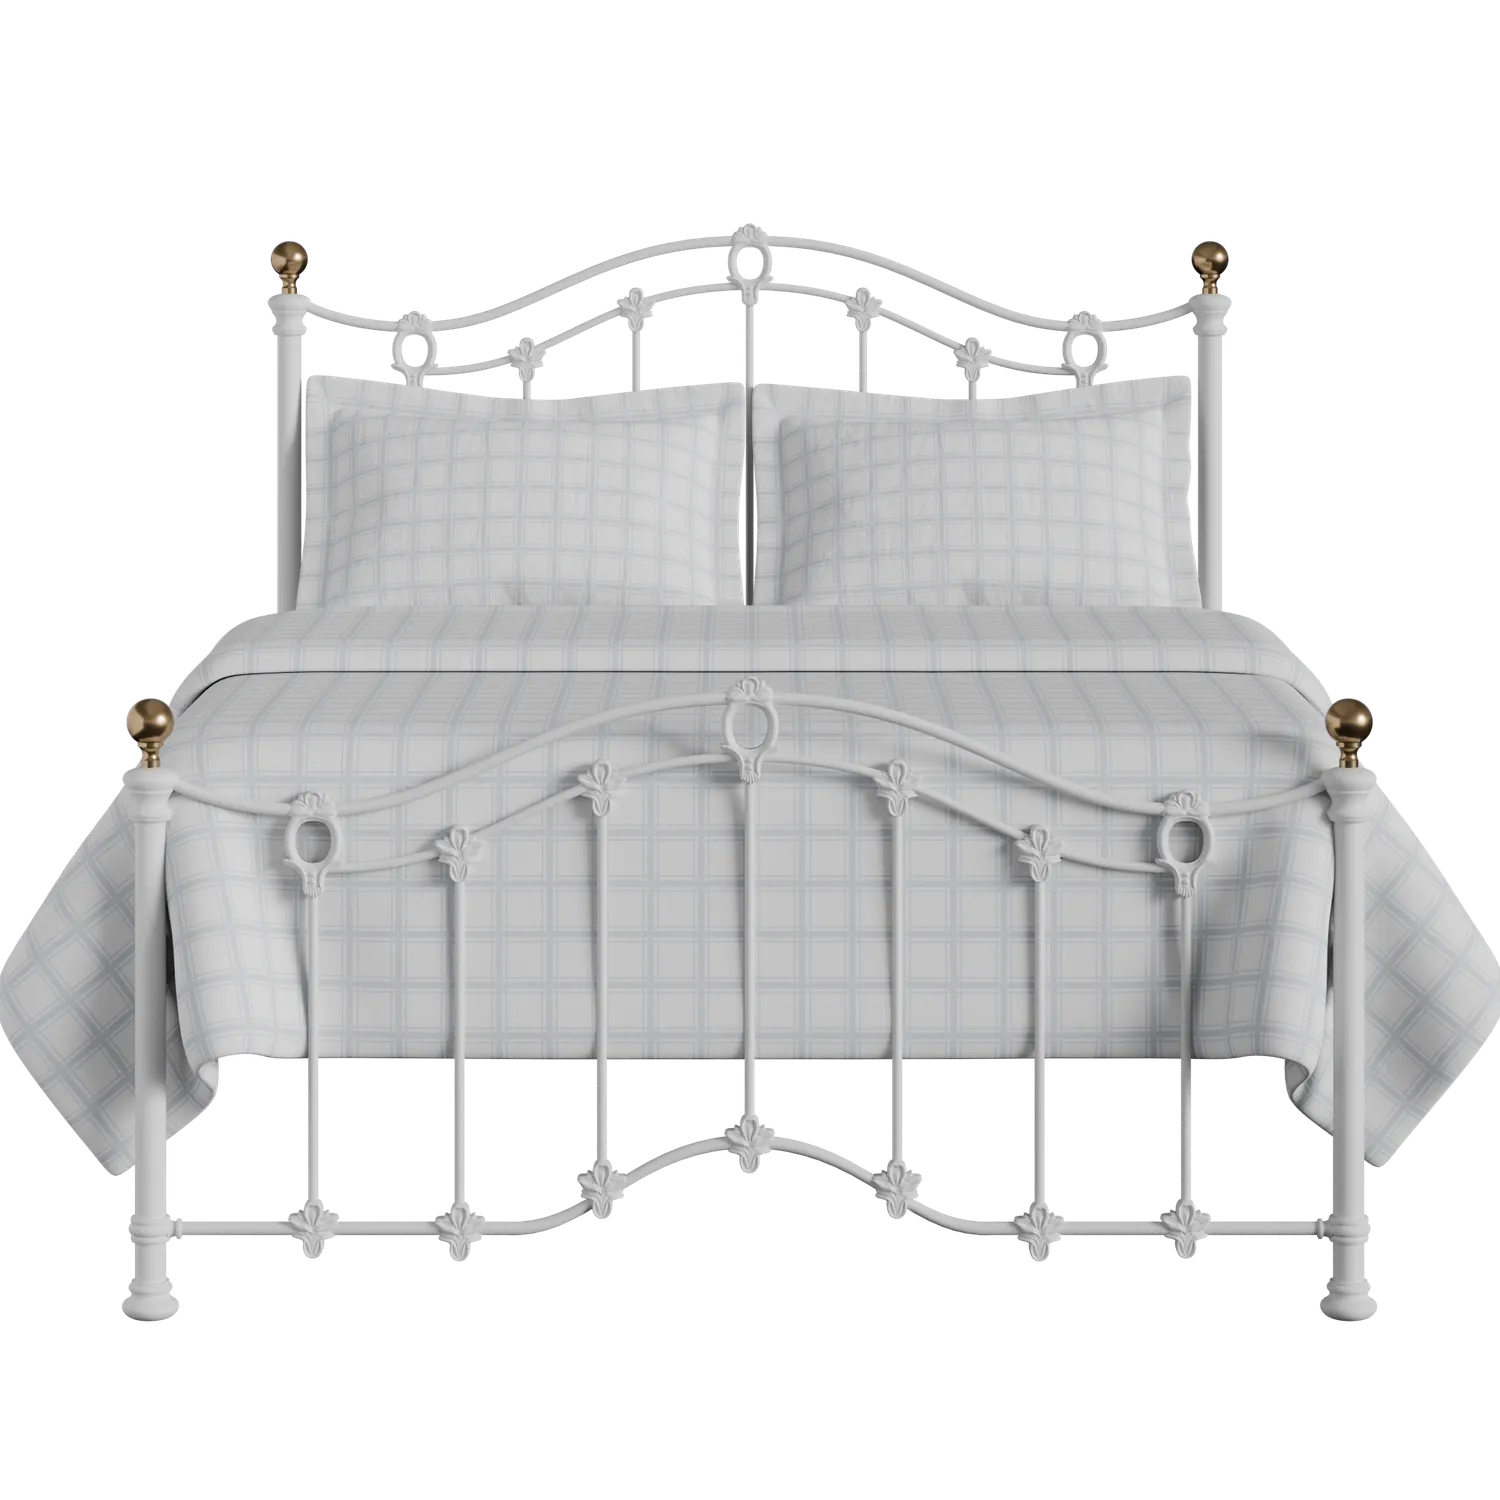 Clarina Low Footend iron/metal bed in white